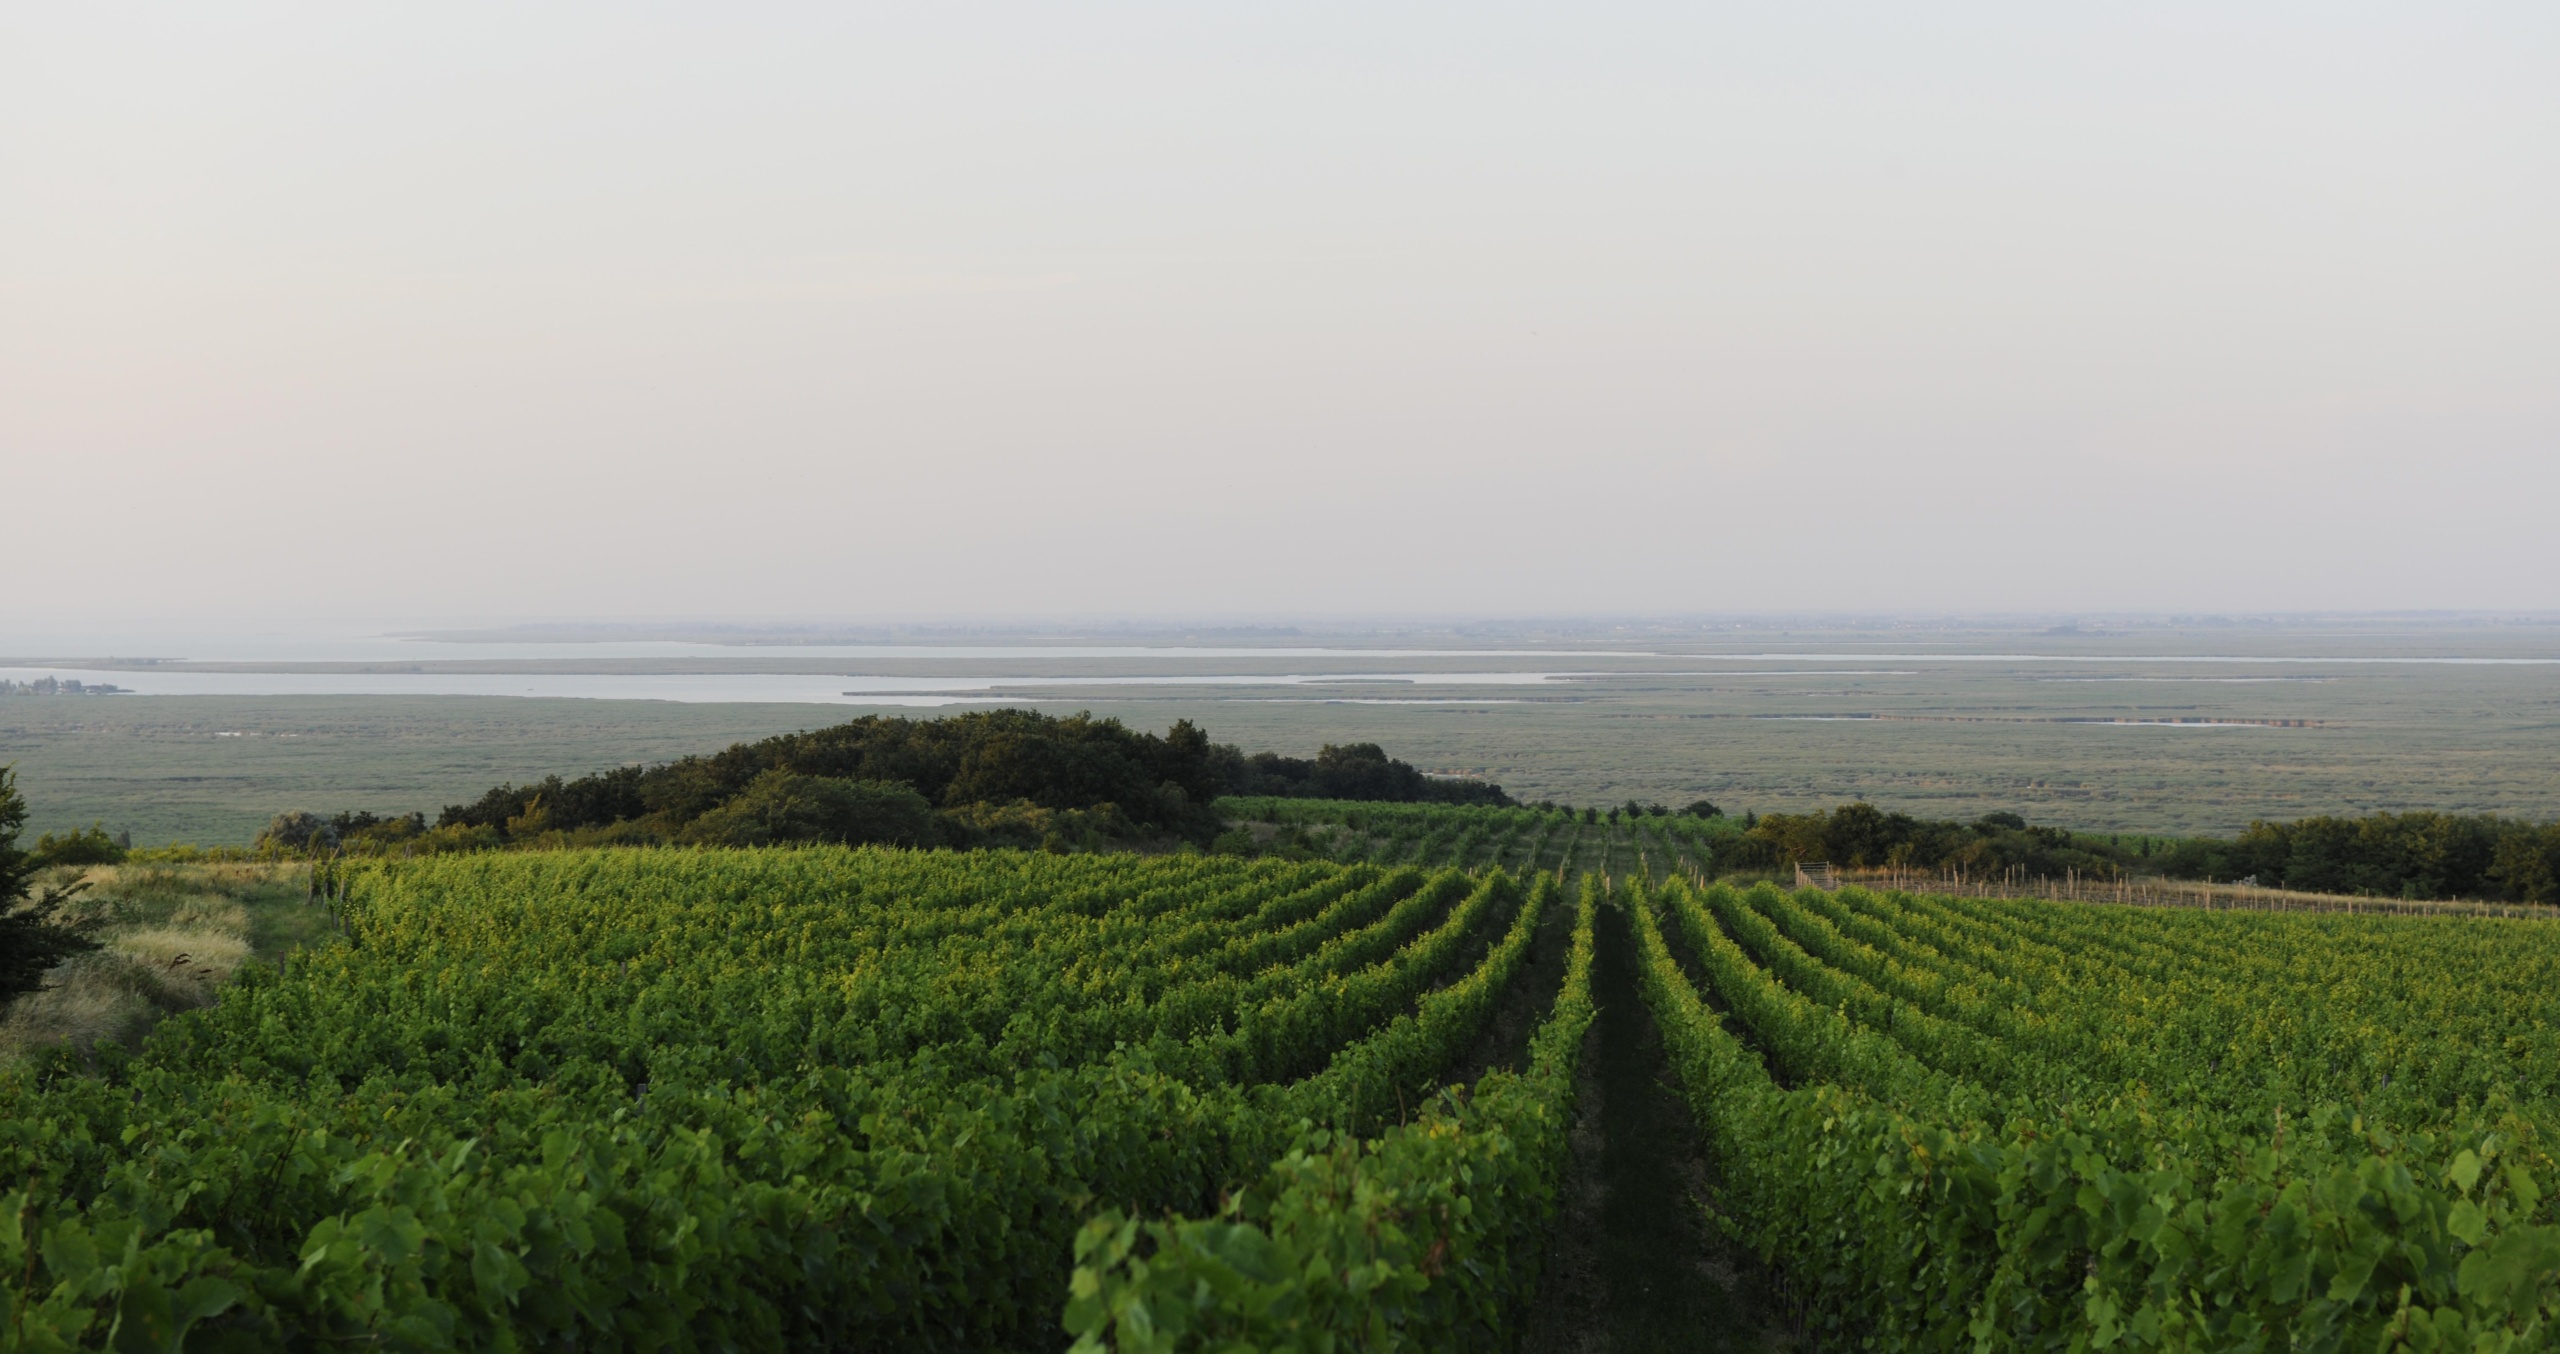 Hungarian vineyards from weninger winery